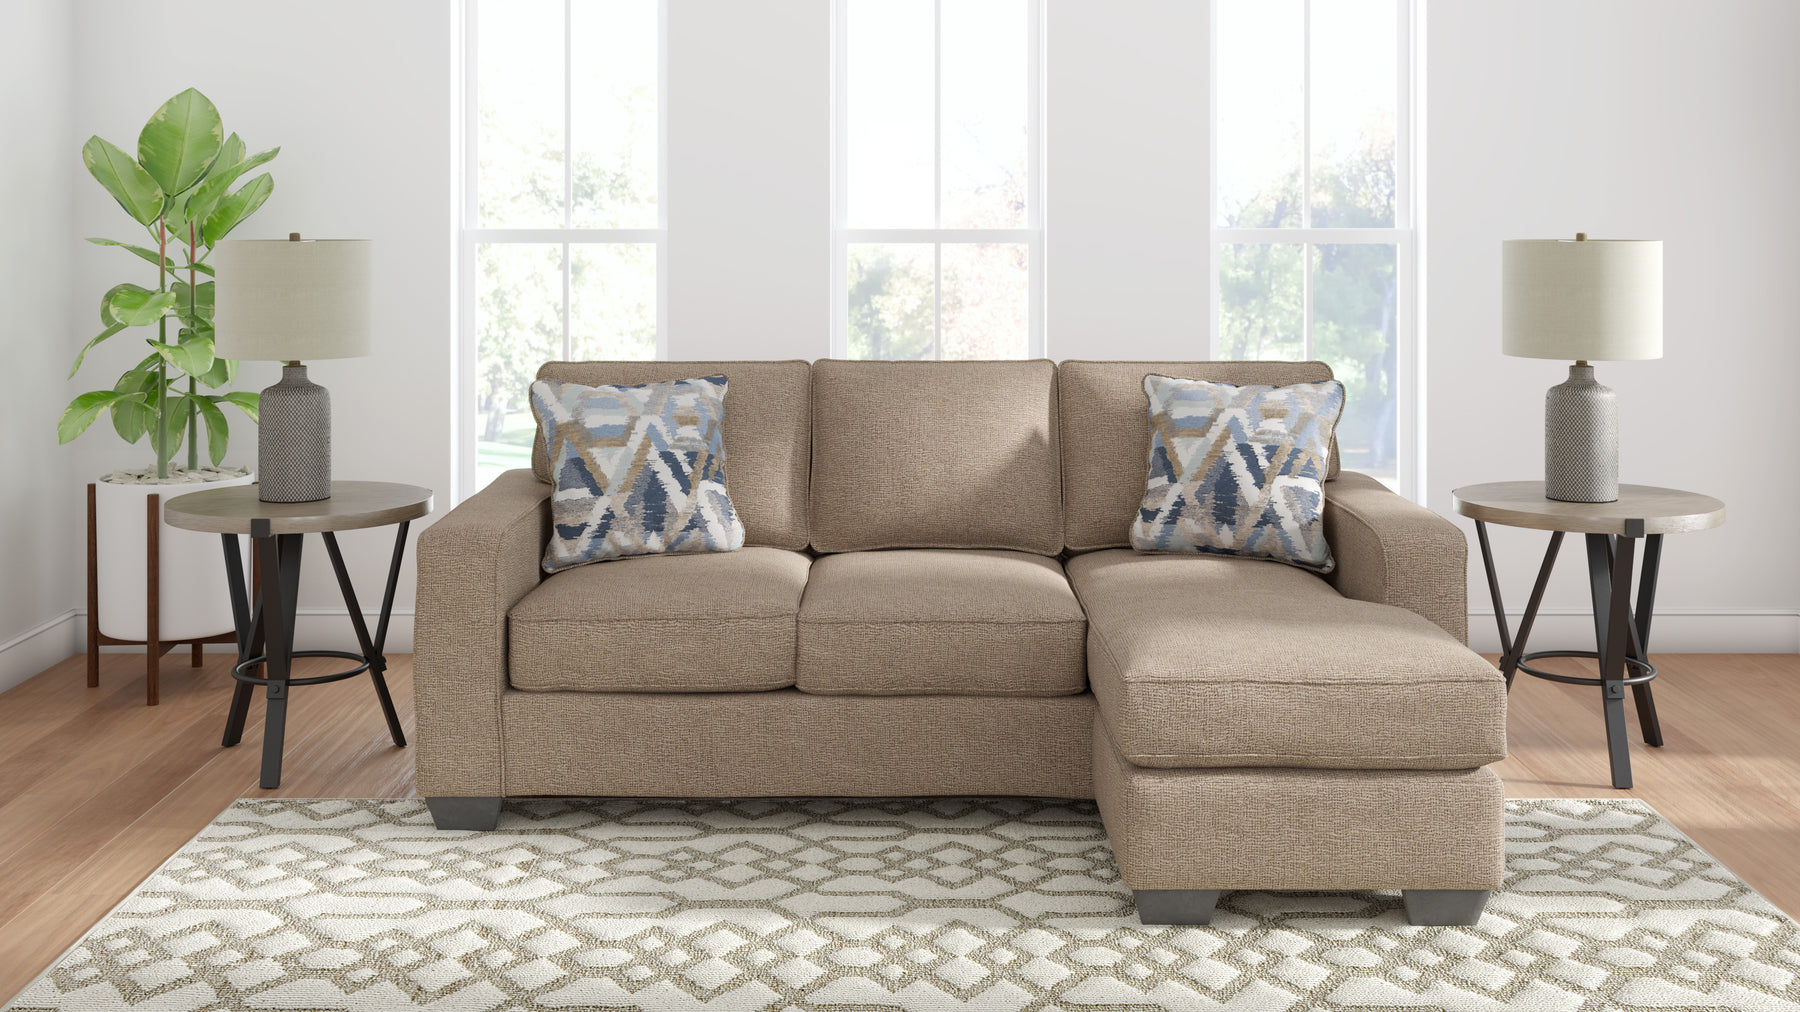 Greaves Sofa Chaise availble in two colors - Las Vegas Furniture Stores